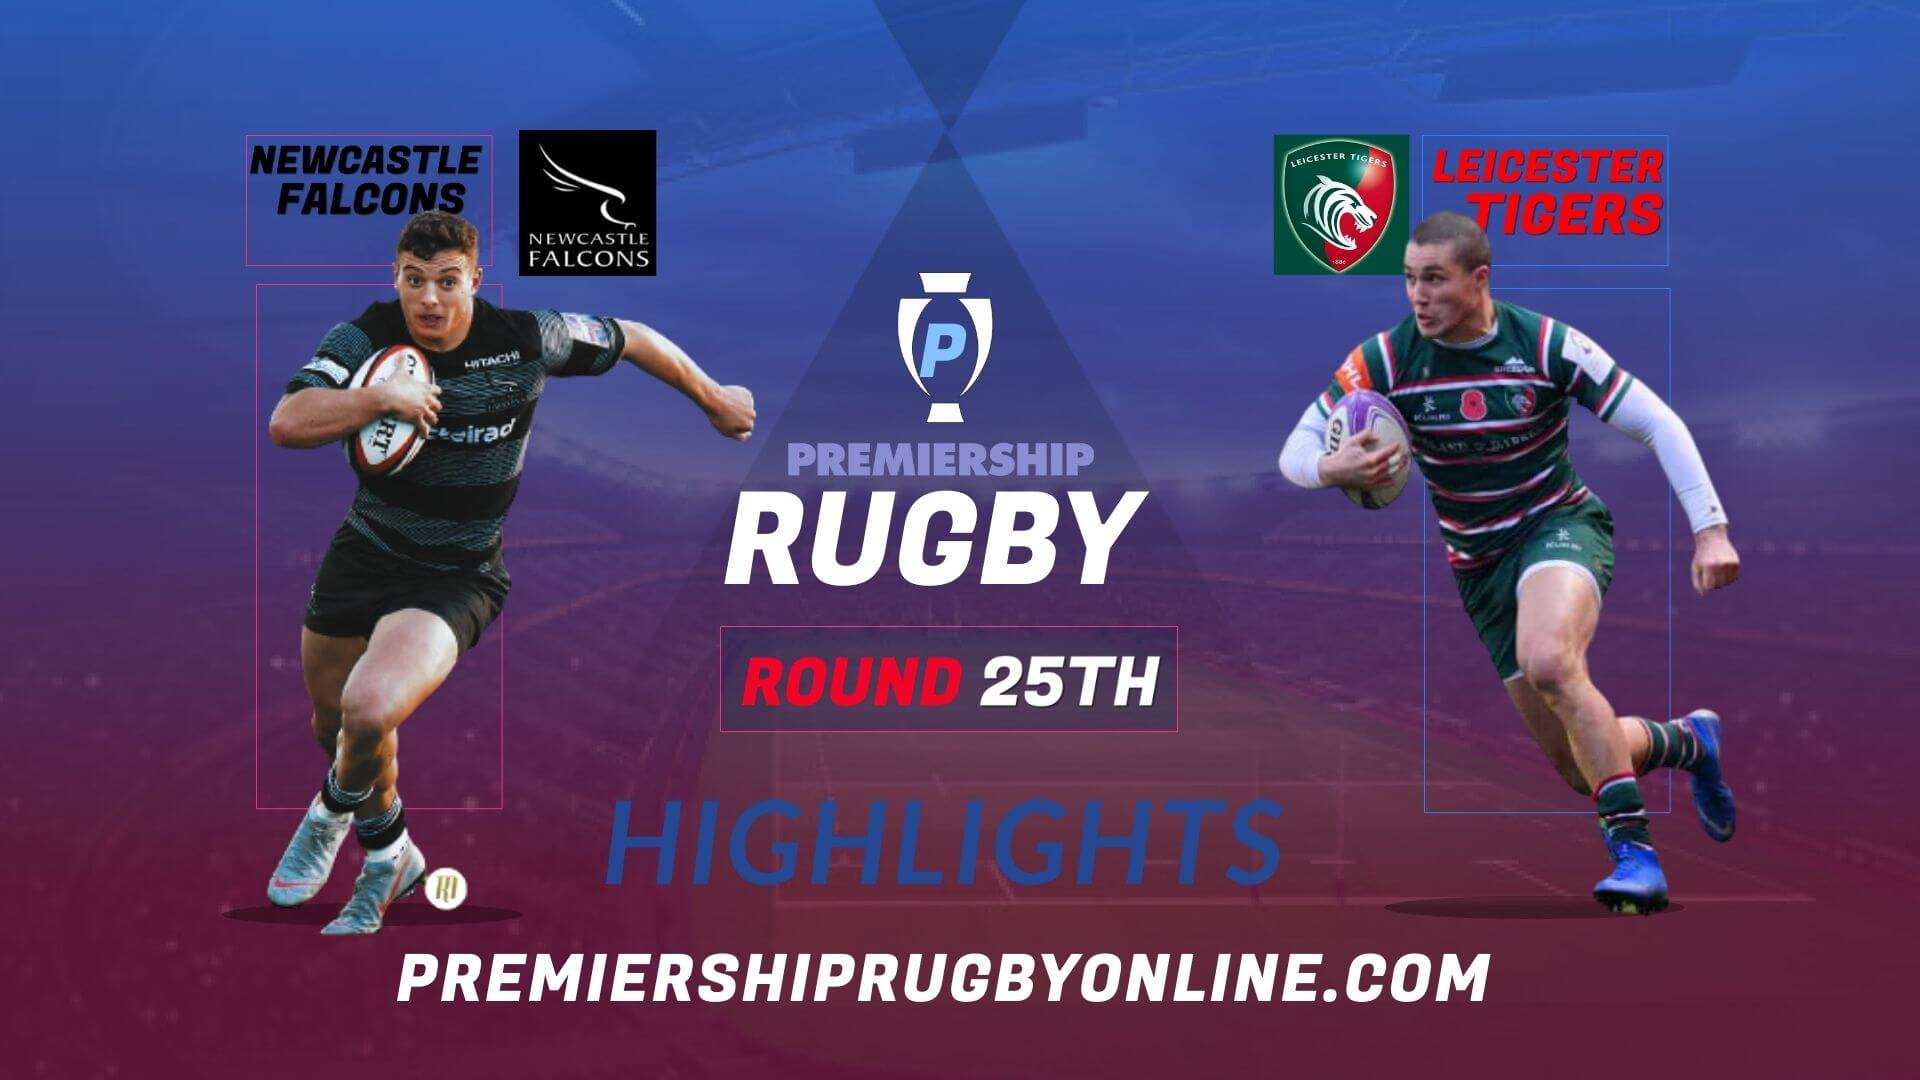 Newcastle Falcons Vs Leicester Tigers Highlights 2022 RD 25